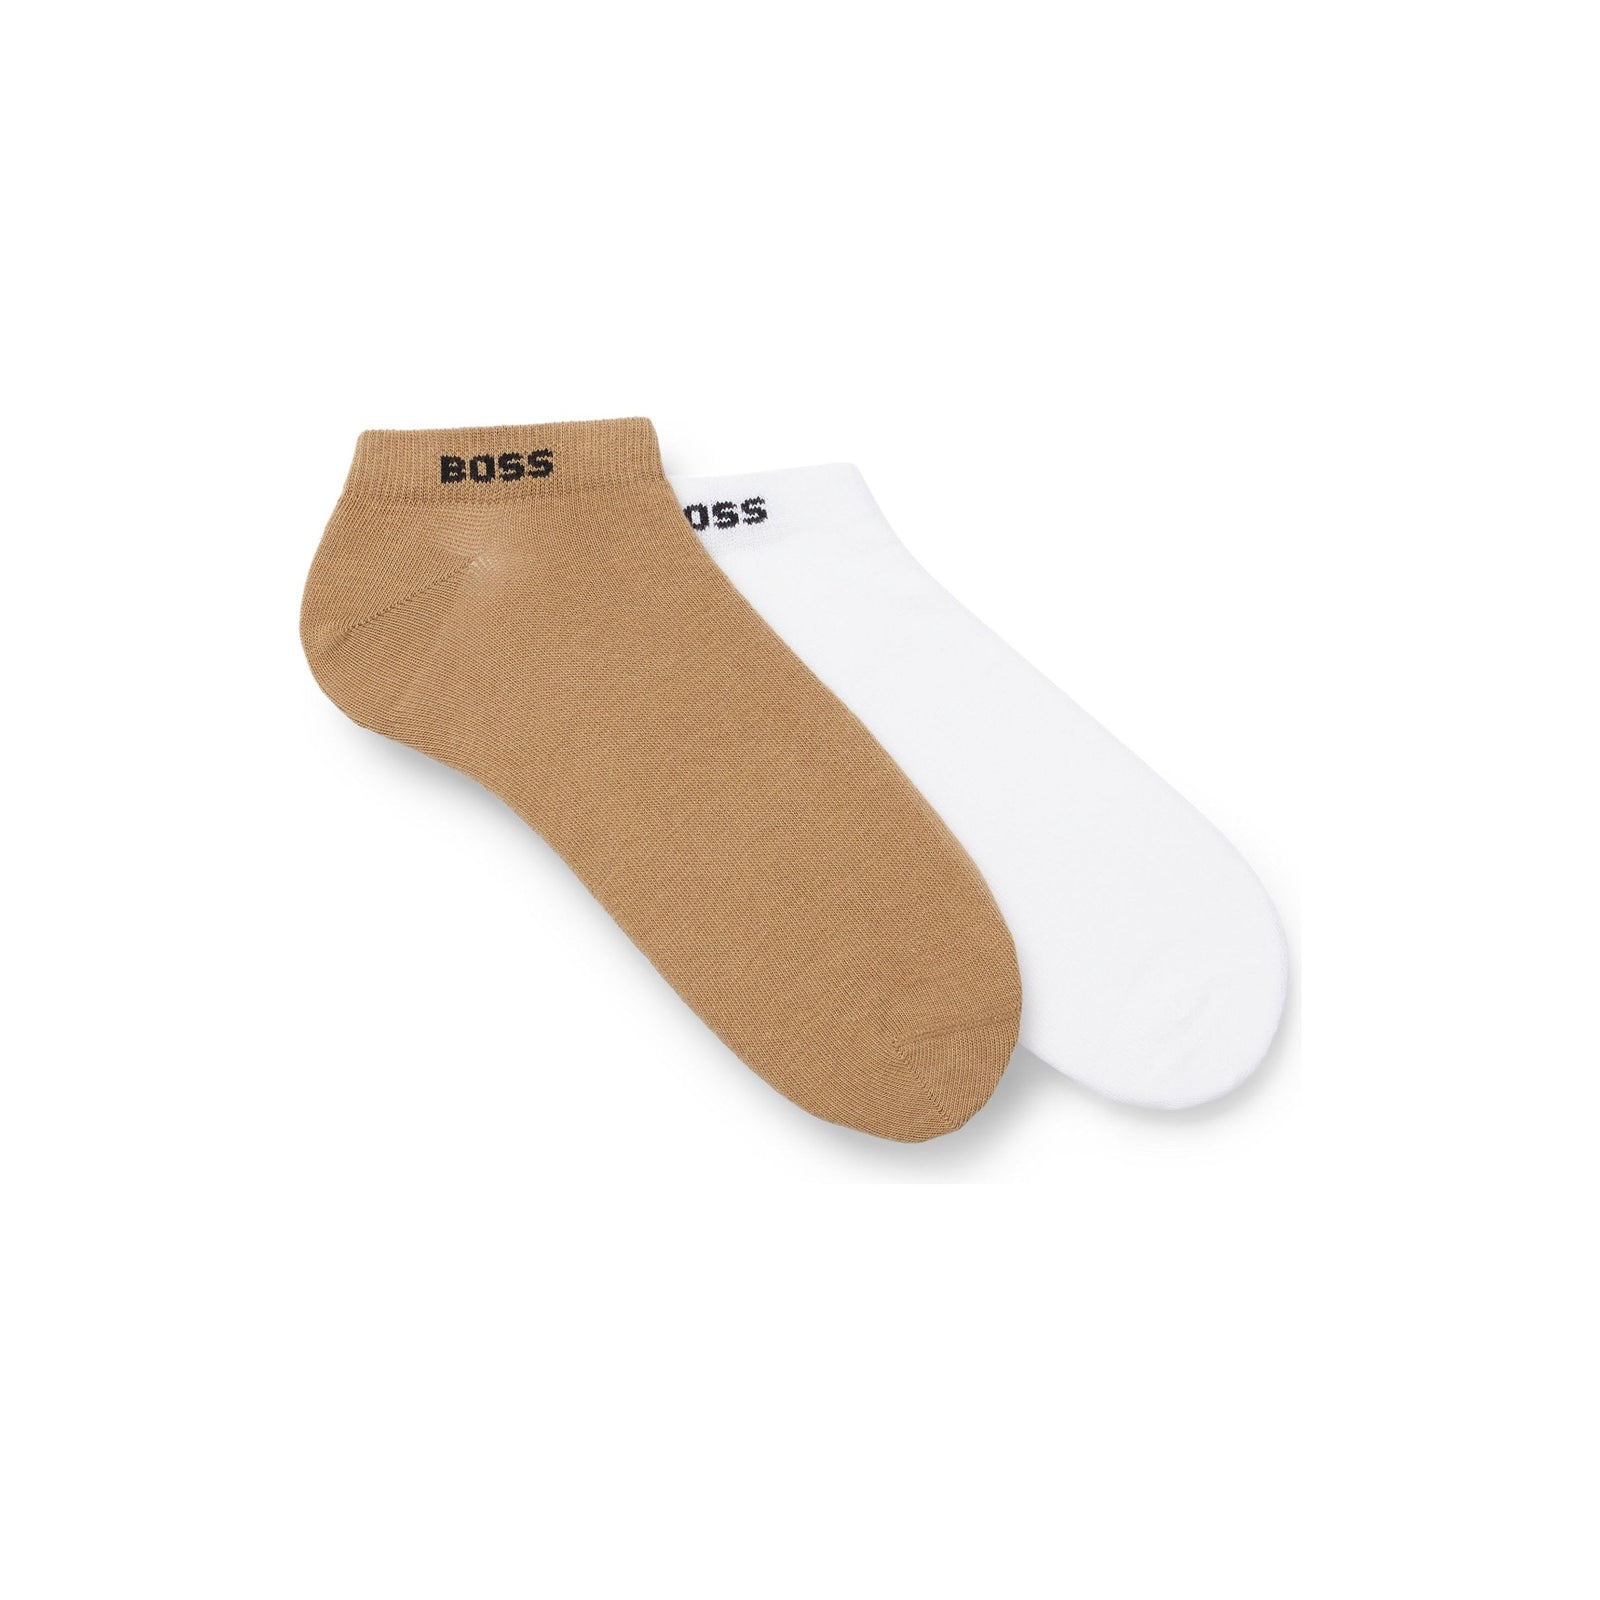 BOSS COTTON BLEND SHORT SOCKS IN A PACK OF TWO - Yooto